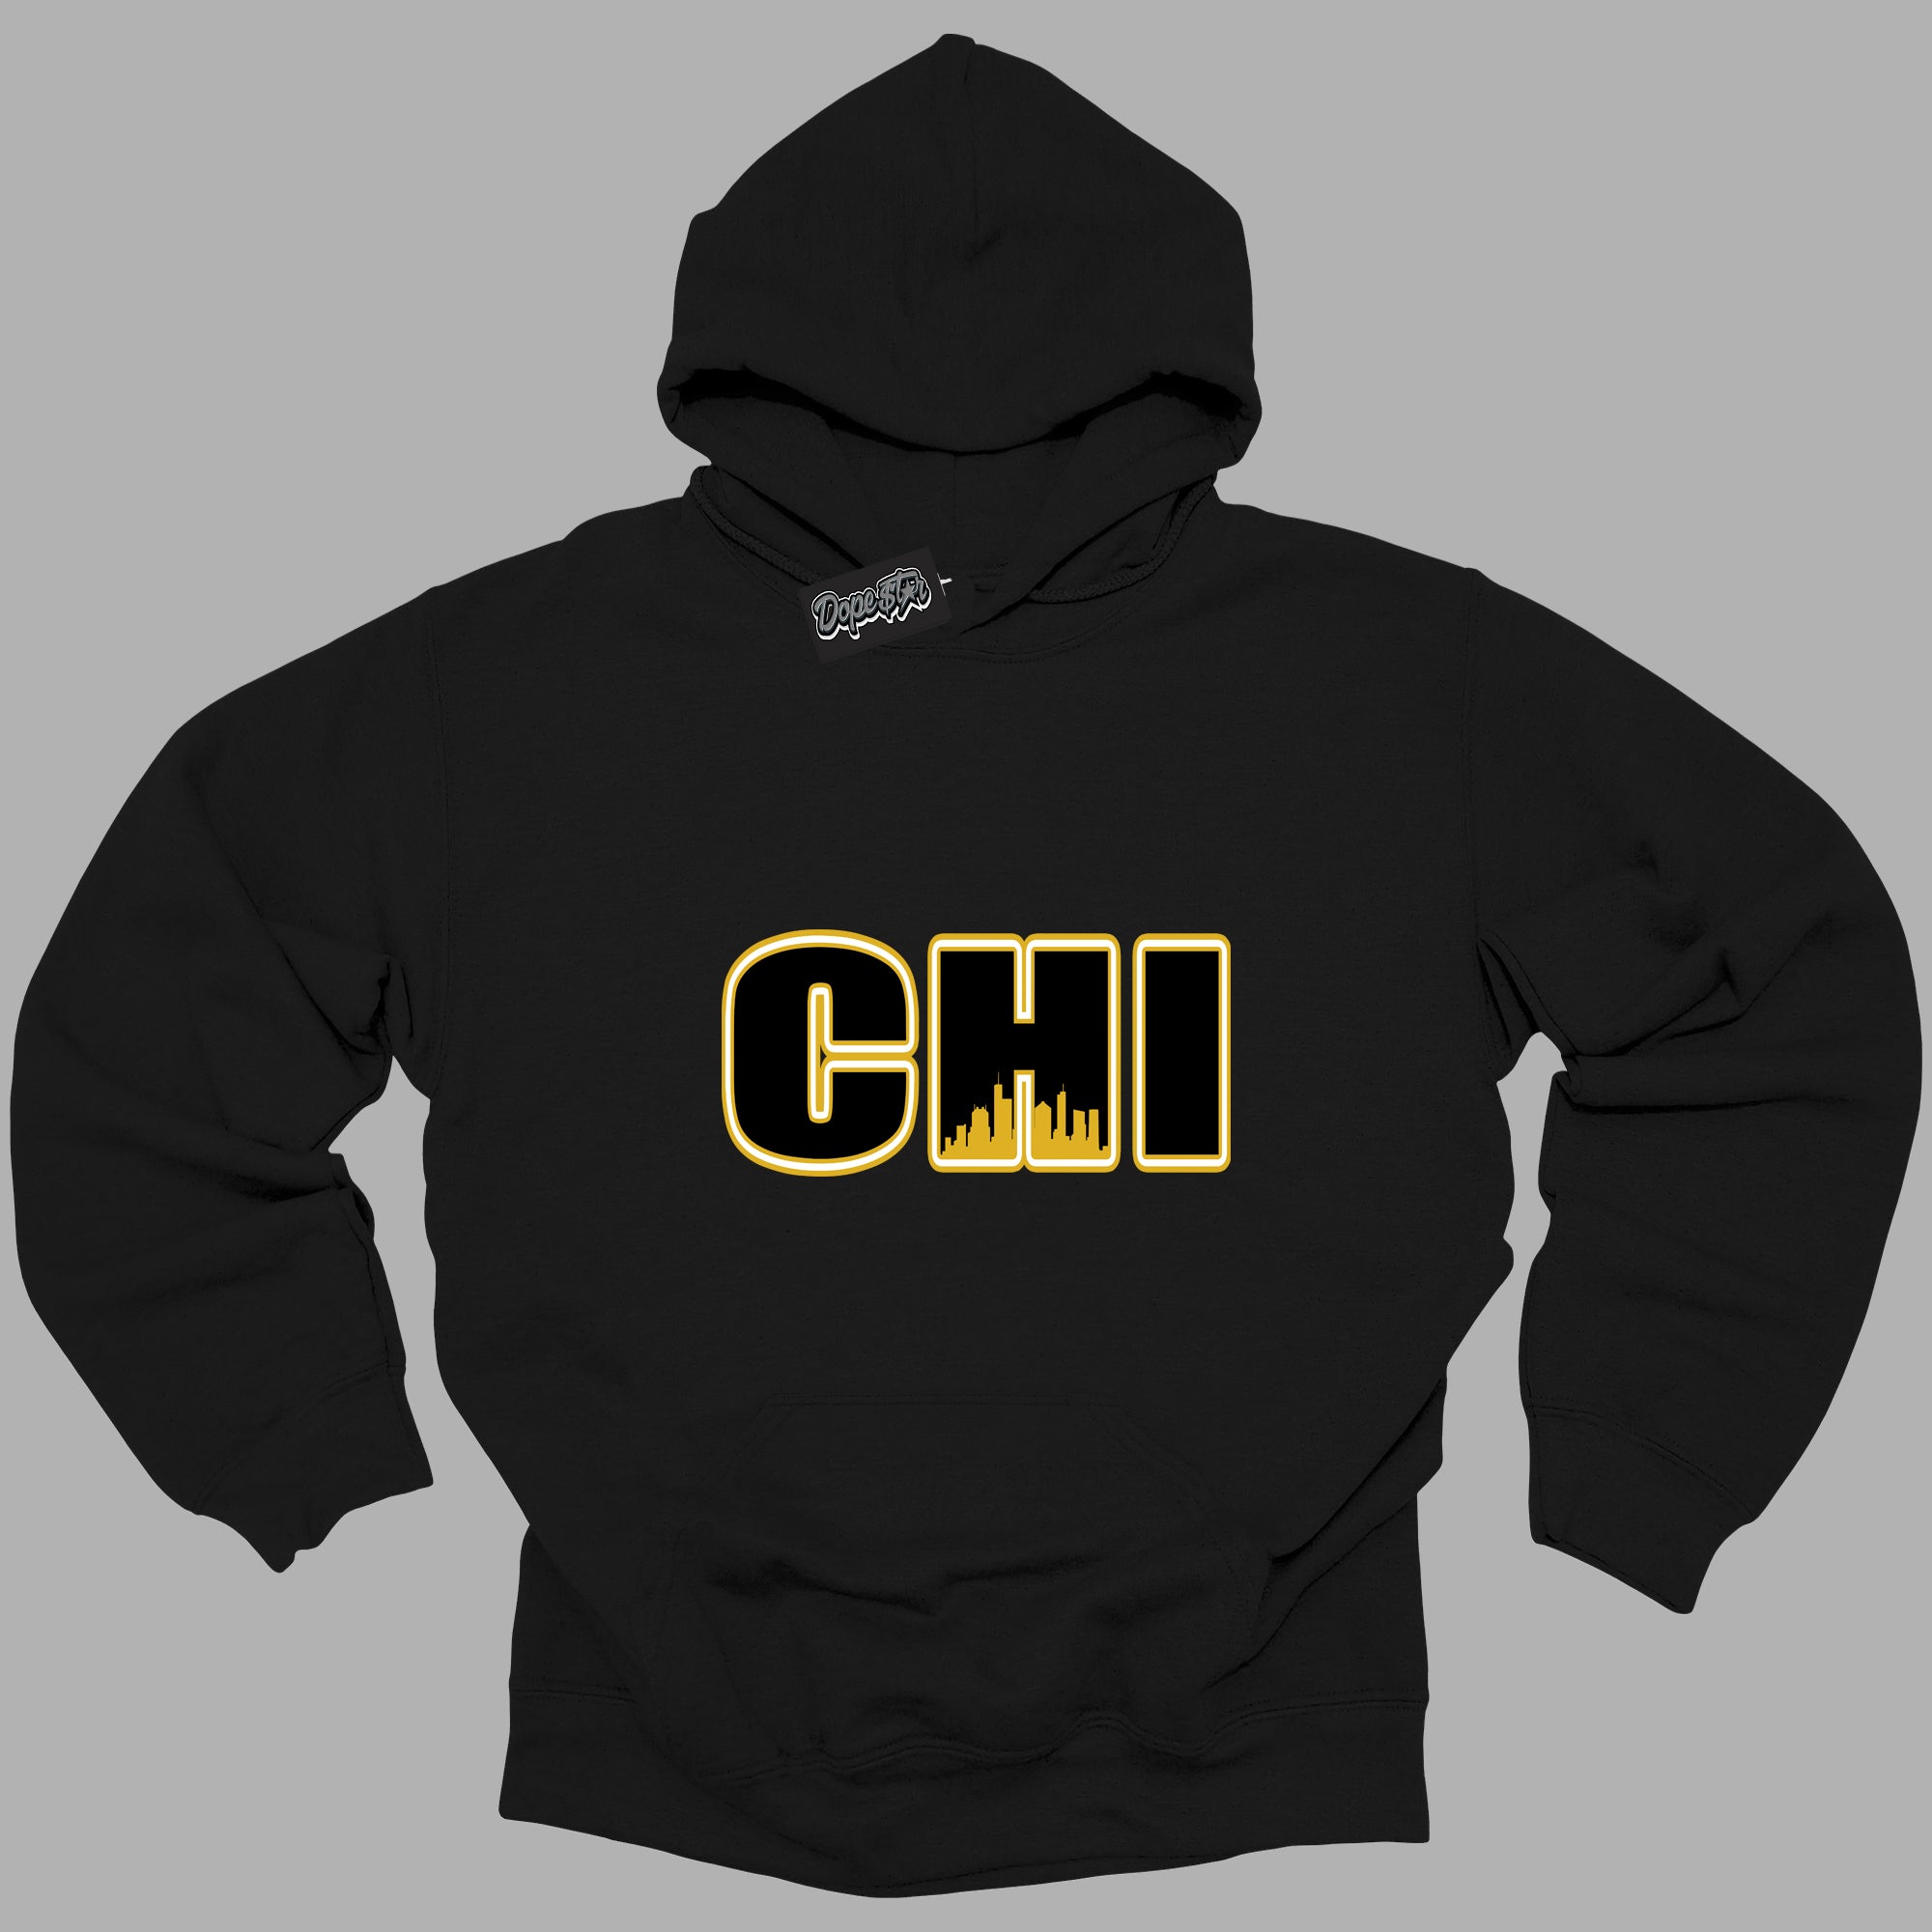 Cool Black Hoodie with “ Chicago ”  design that Perfectly Matches Yellow Ochre 6s Sneakers.